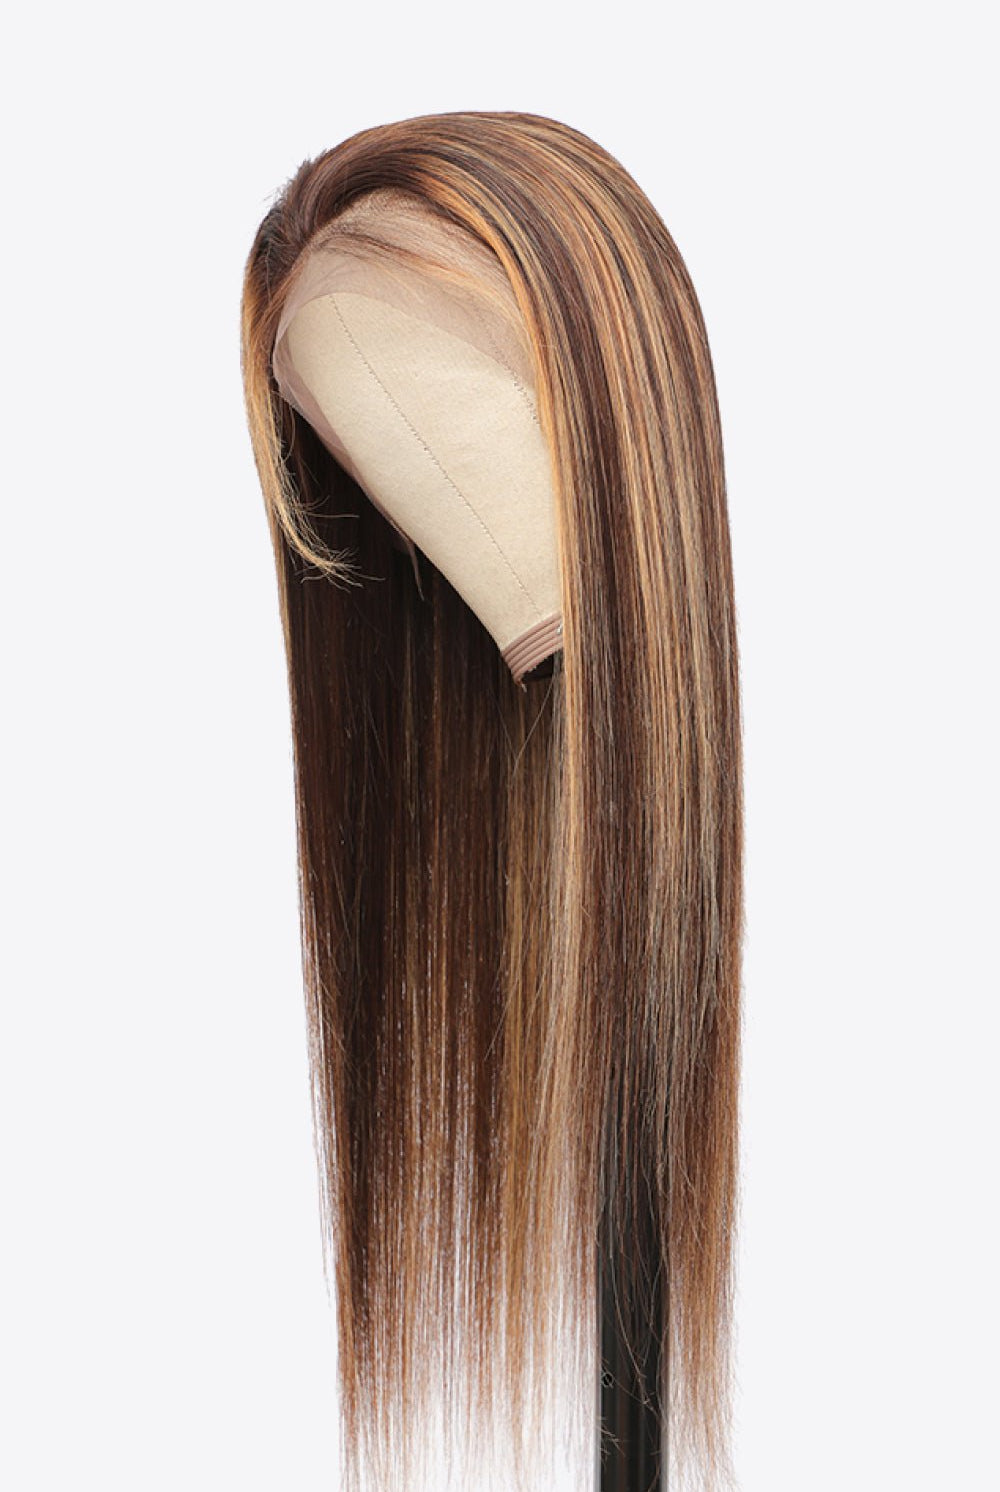 18" 160g Highlight Ombre #P4/27 13x4 Lace Front Wigs Human Virgin Hair 150% Density - GemThreads Boutique